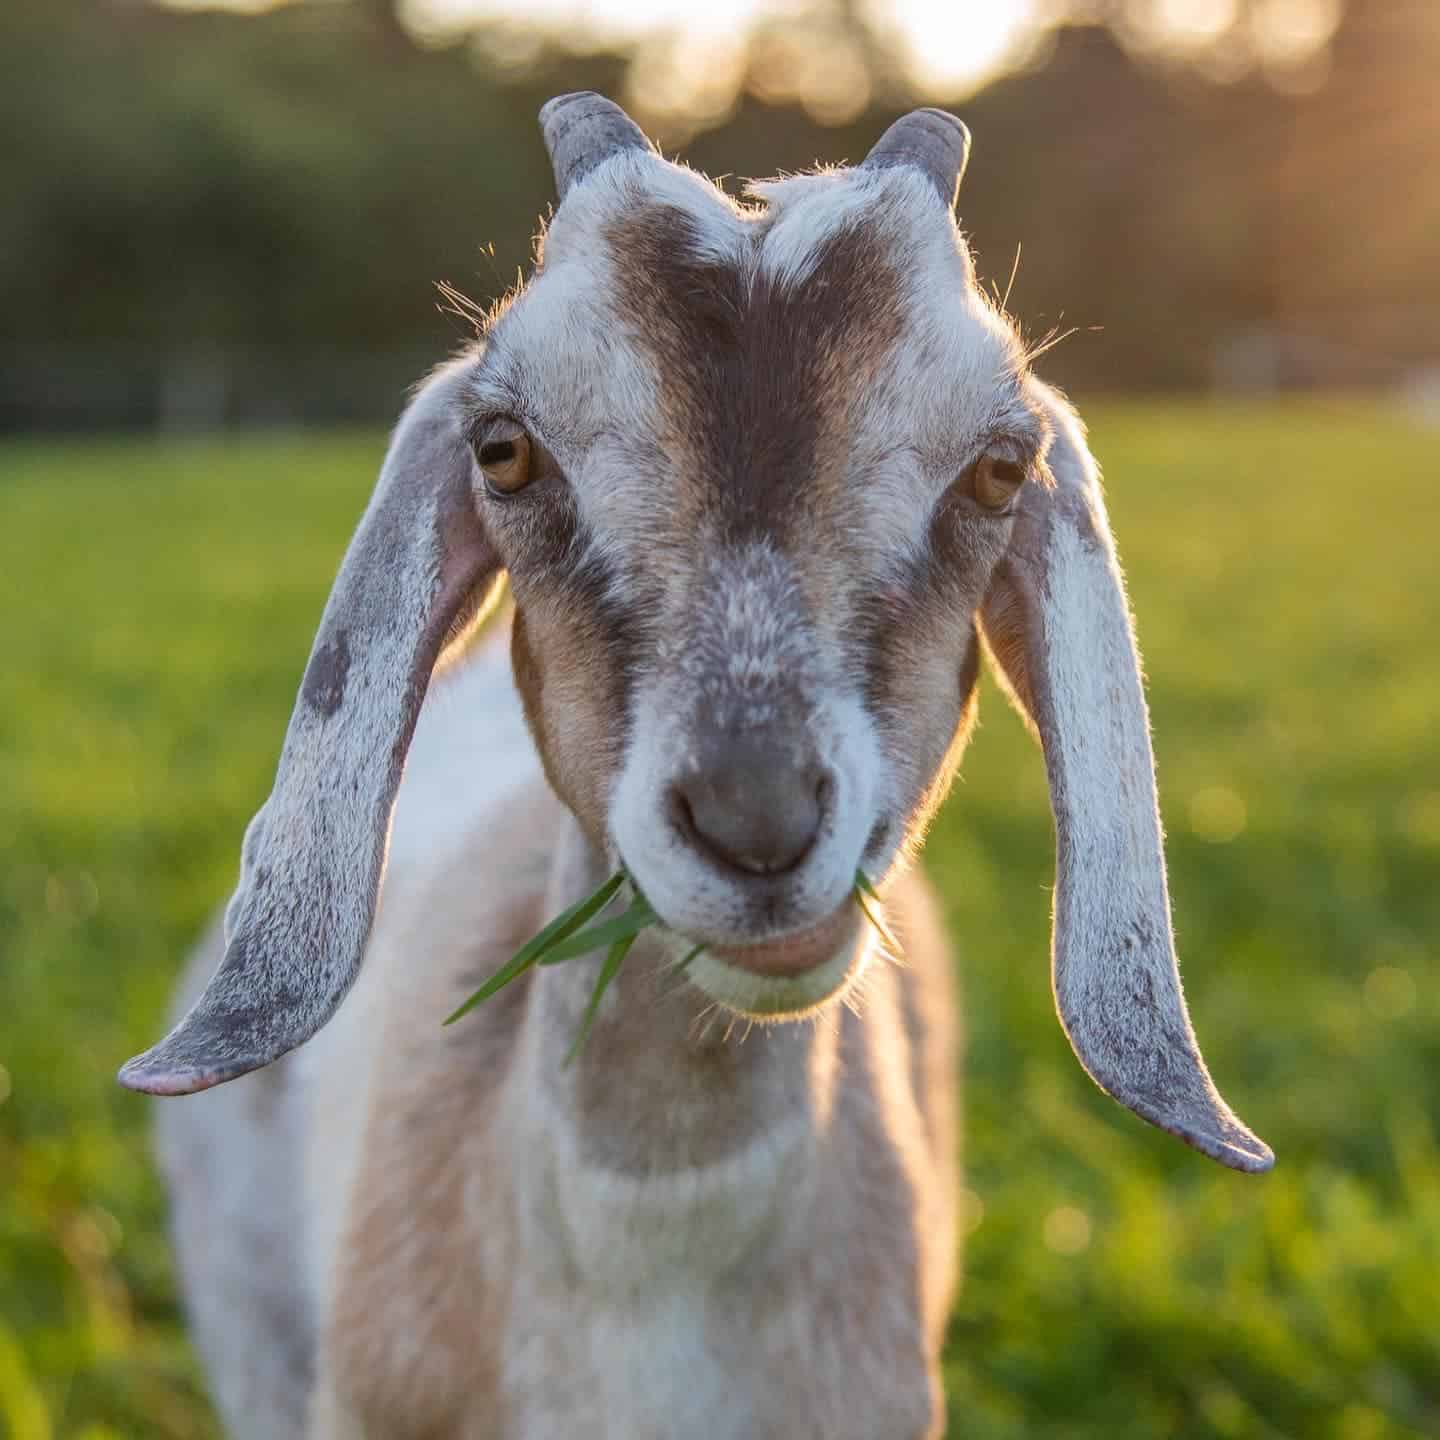 Things That Are Toxic To Goats - The Open Sanctuary Project